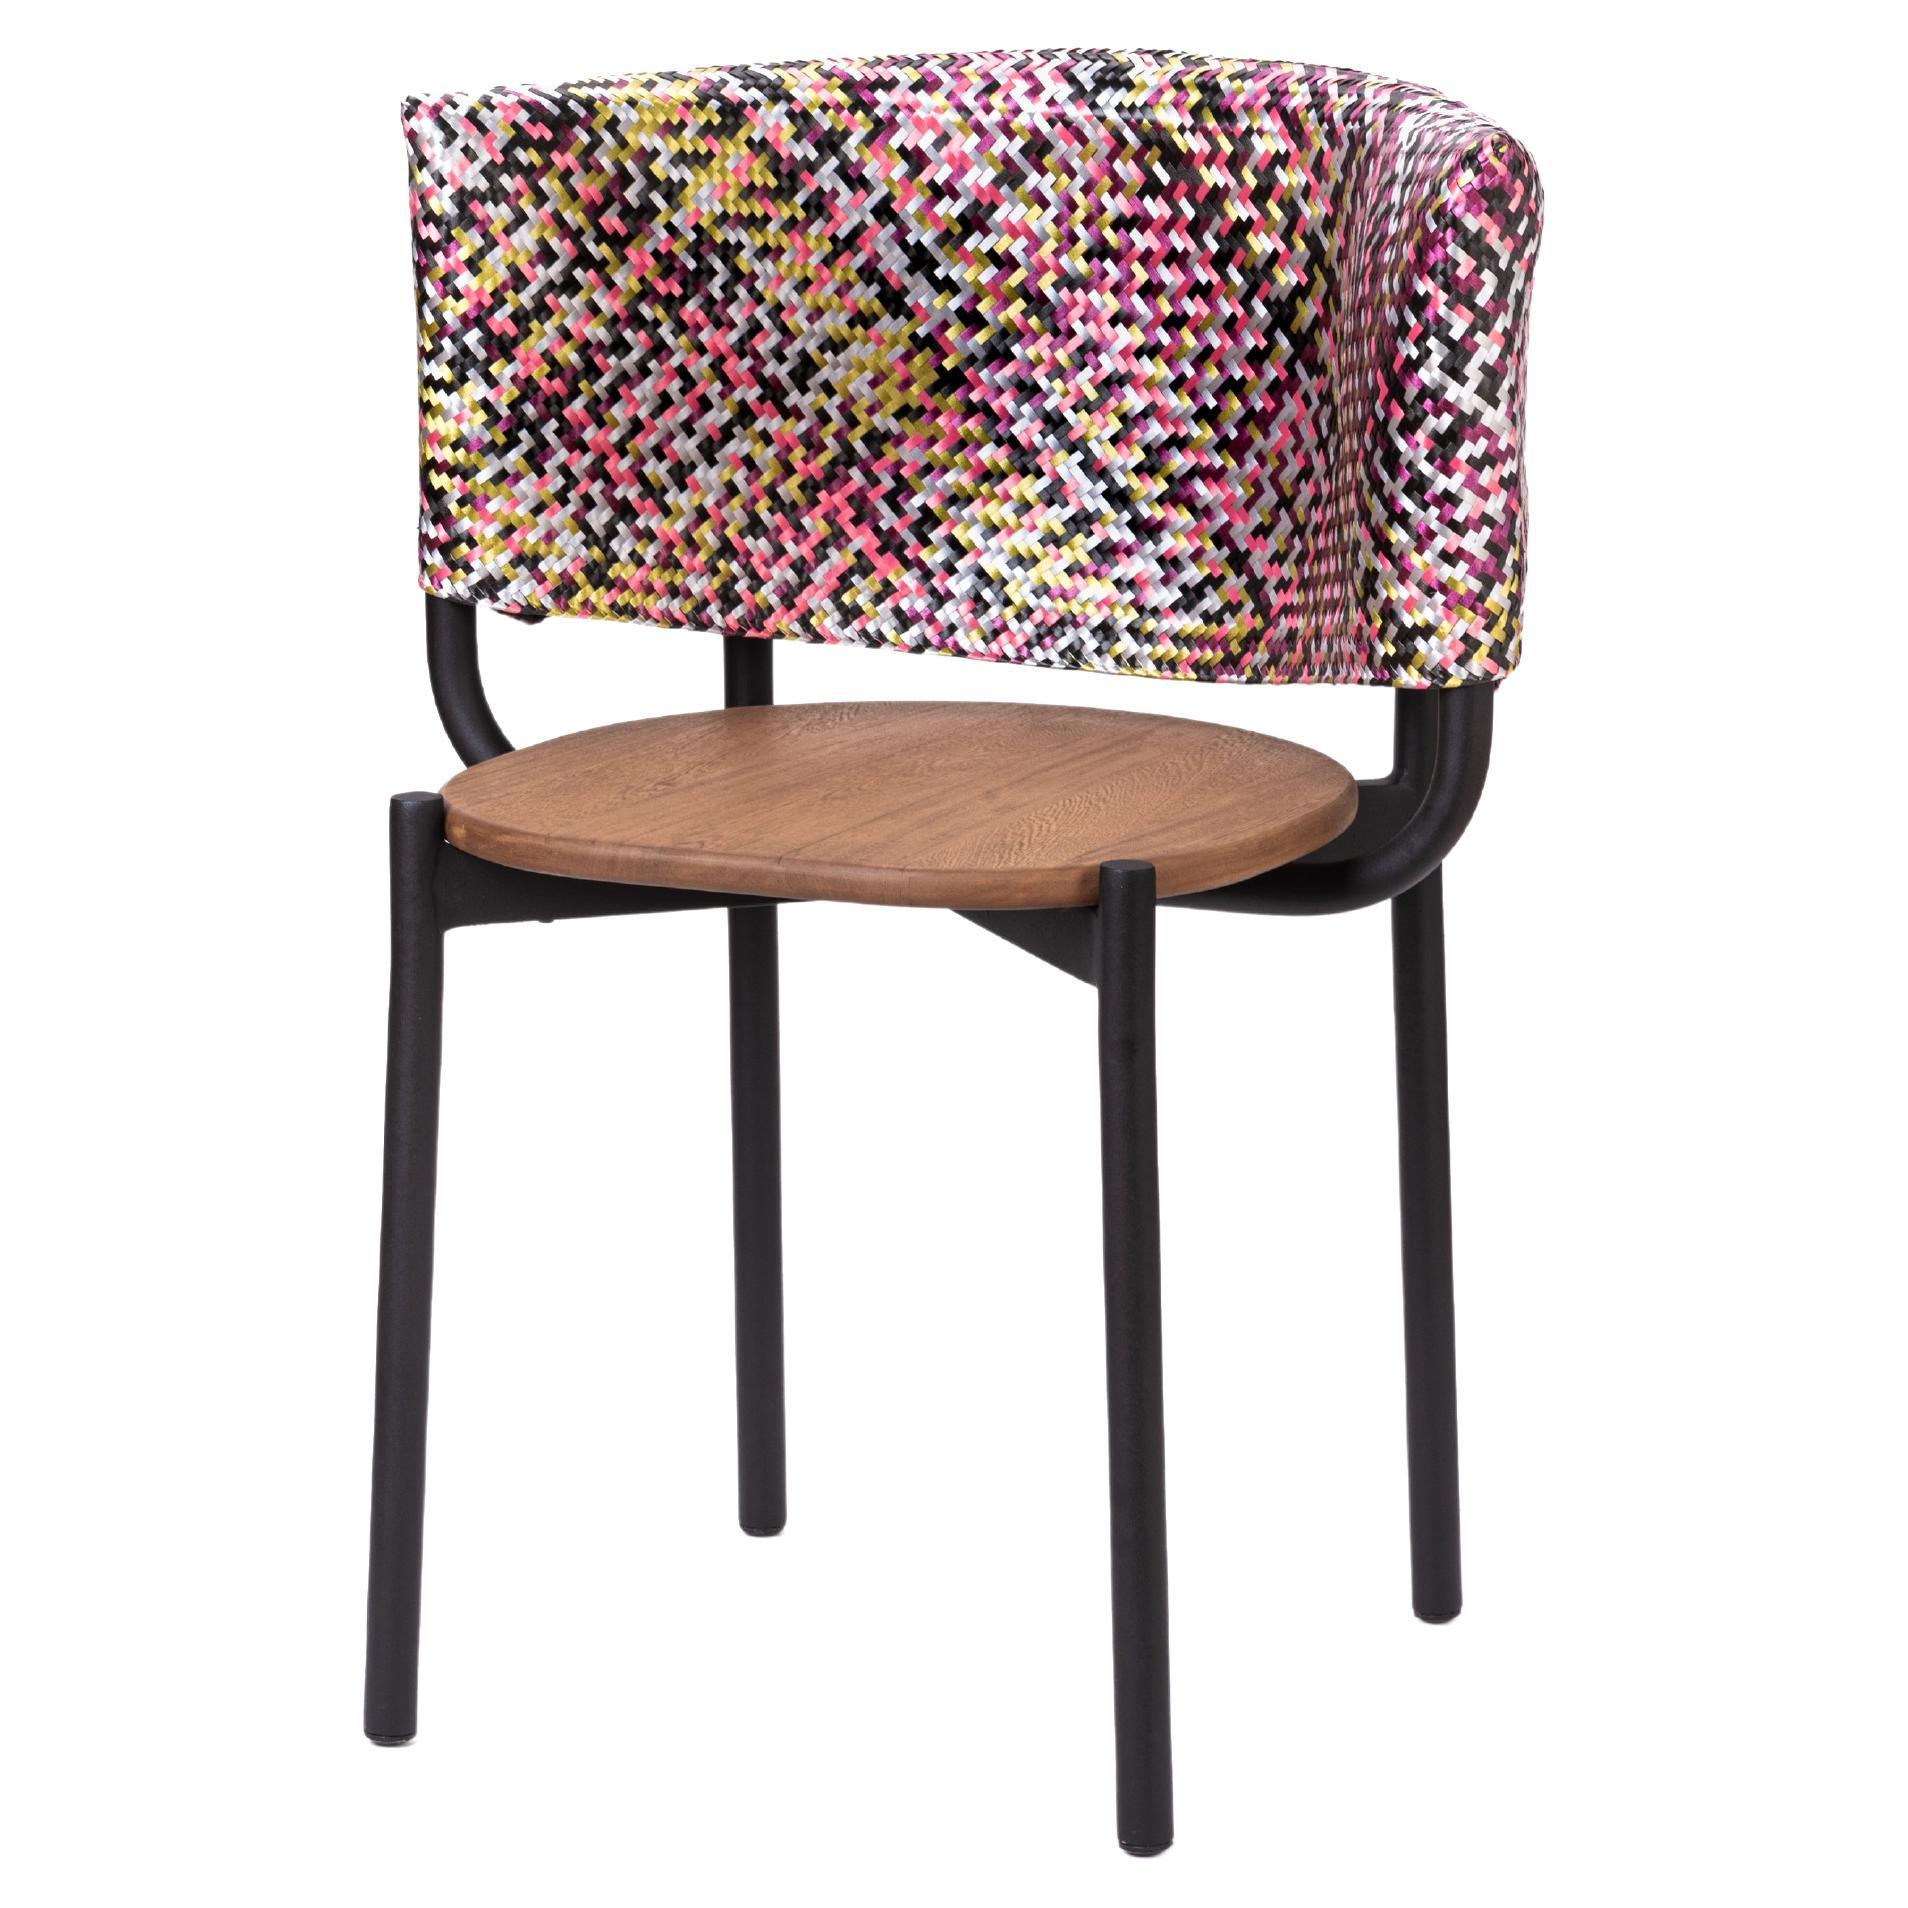 Black Outdoor Chair with Handmade Synthetic Fiber Weaving Back For Sale